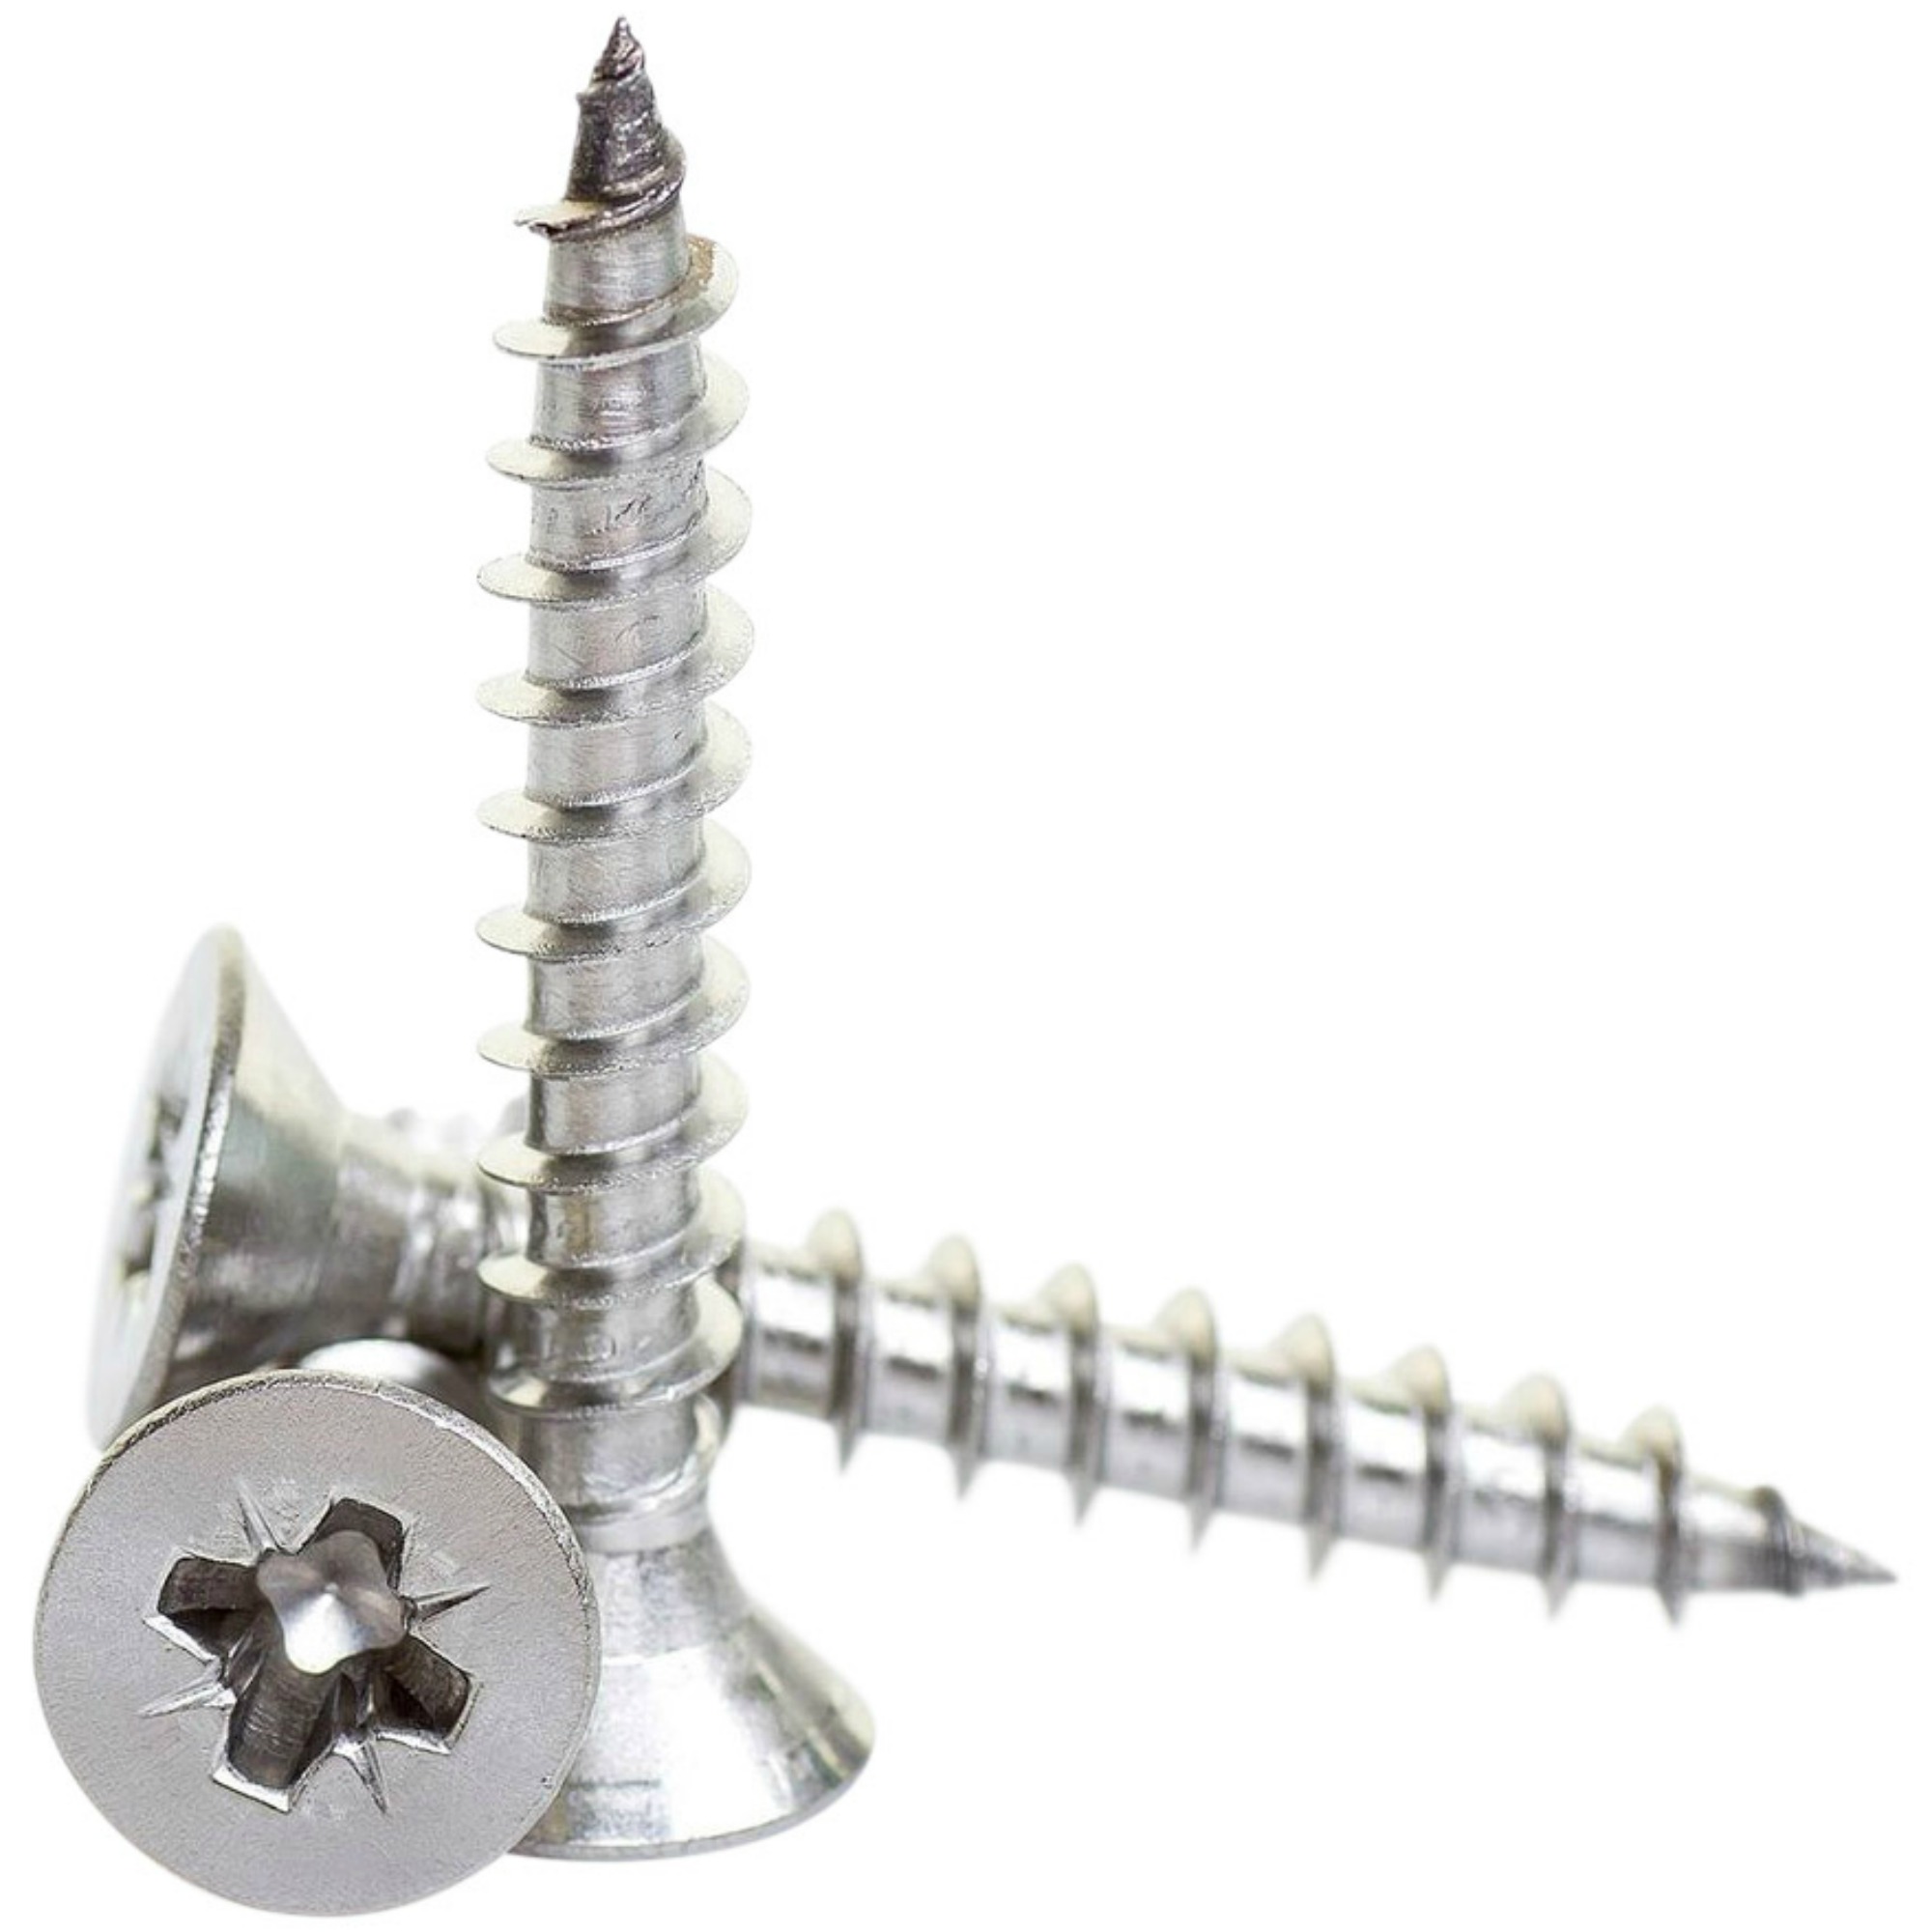 6mm 14g A4 MARINE GRADE STAINLESS STEEL FULLY THREADED CHIPBOARD WOOD SCREWS